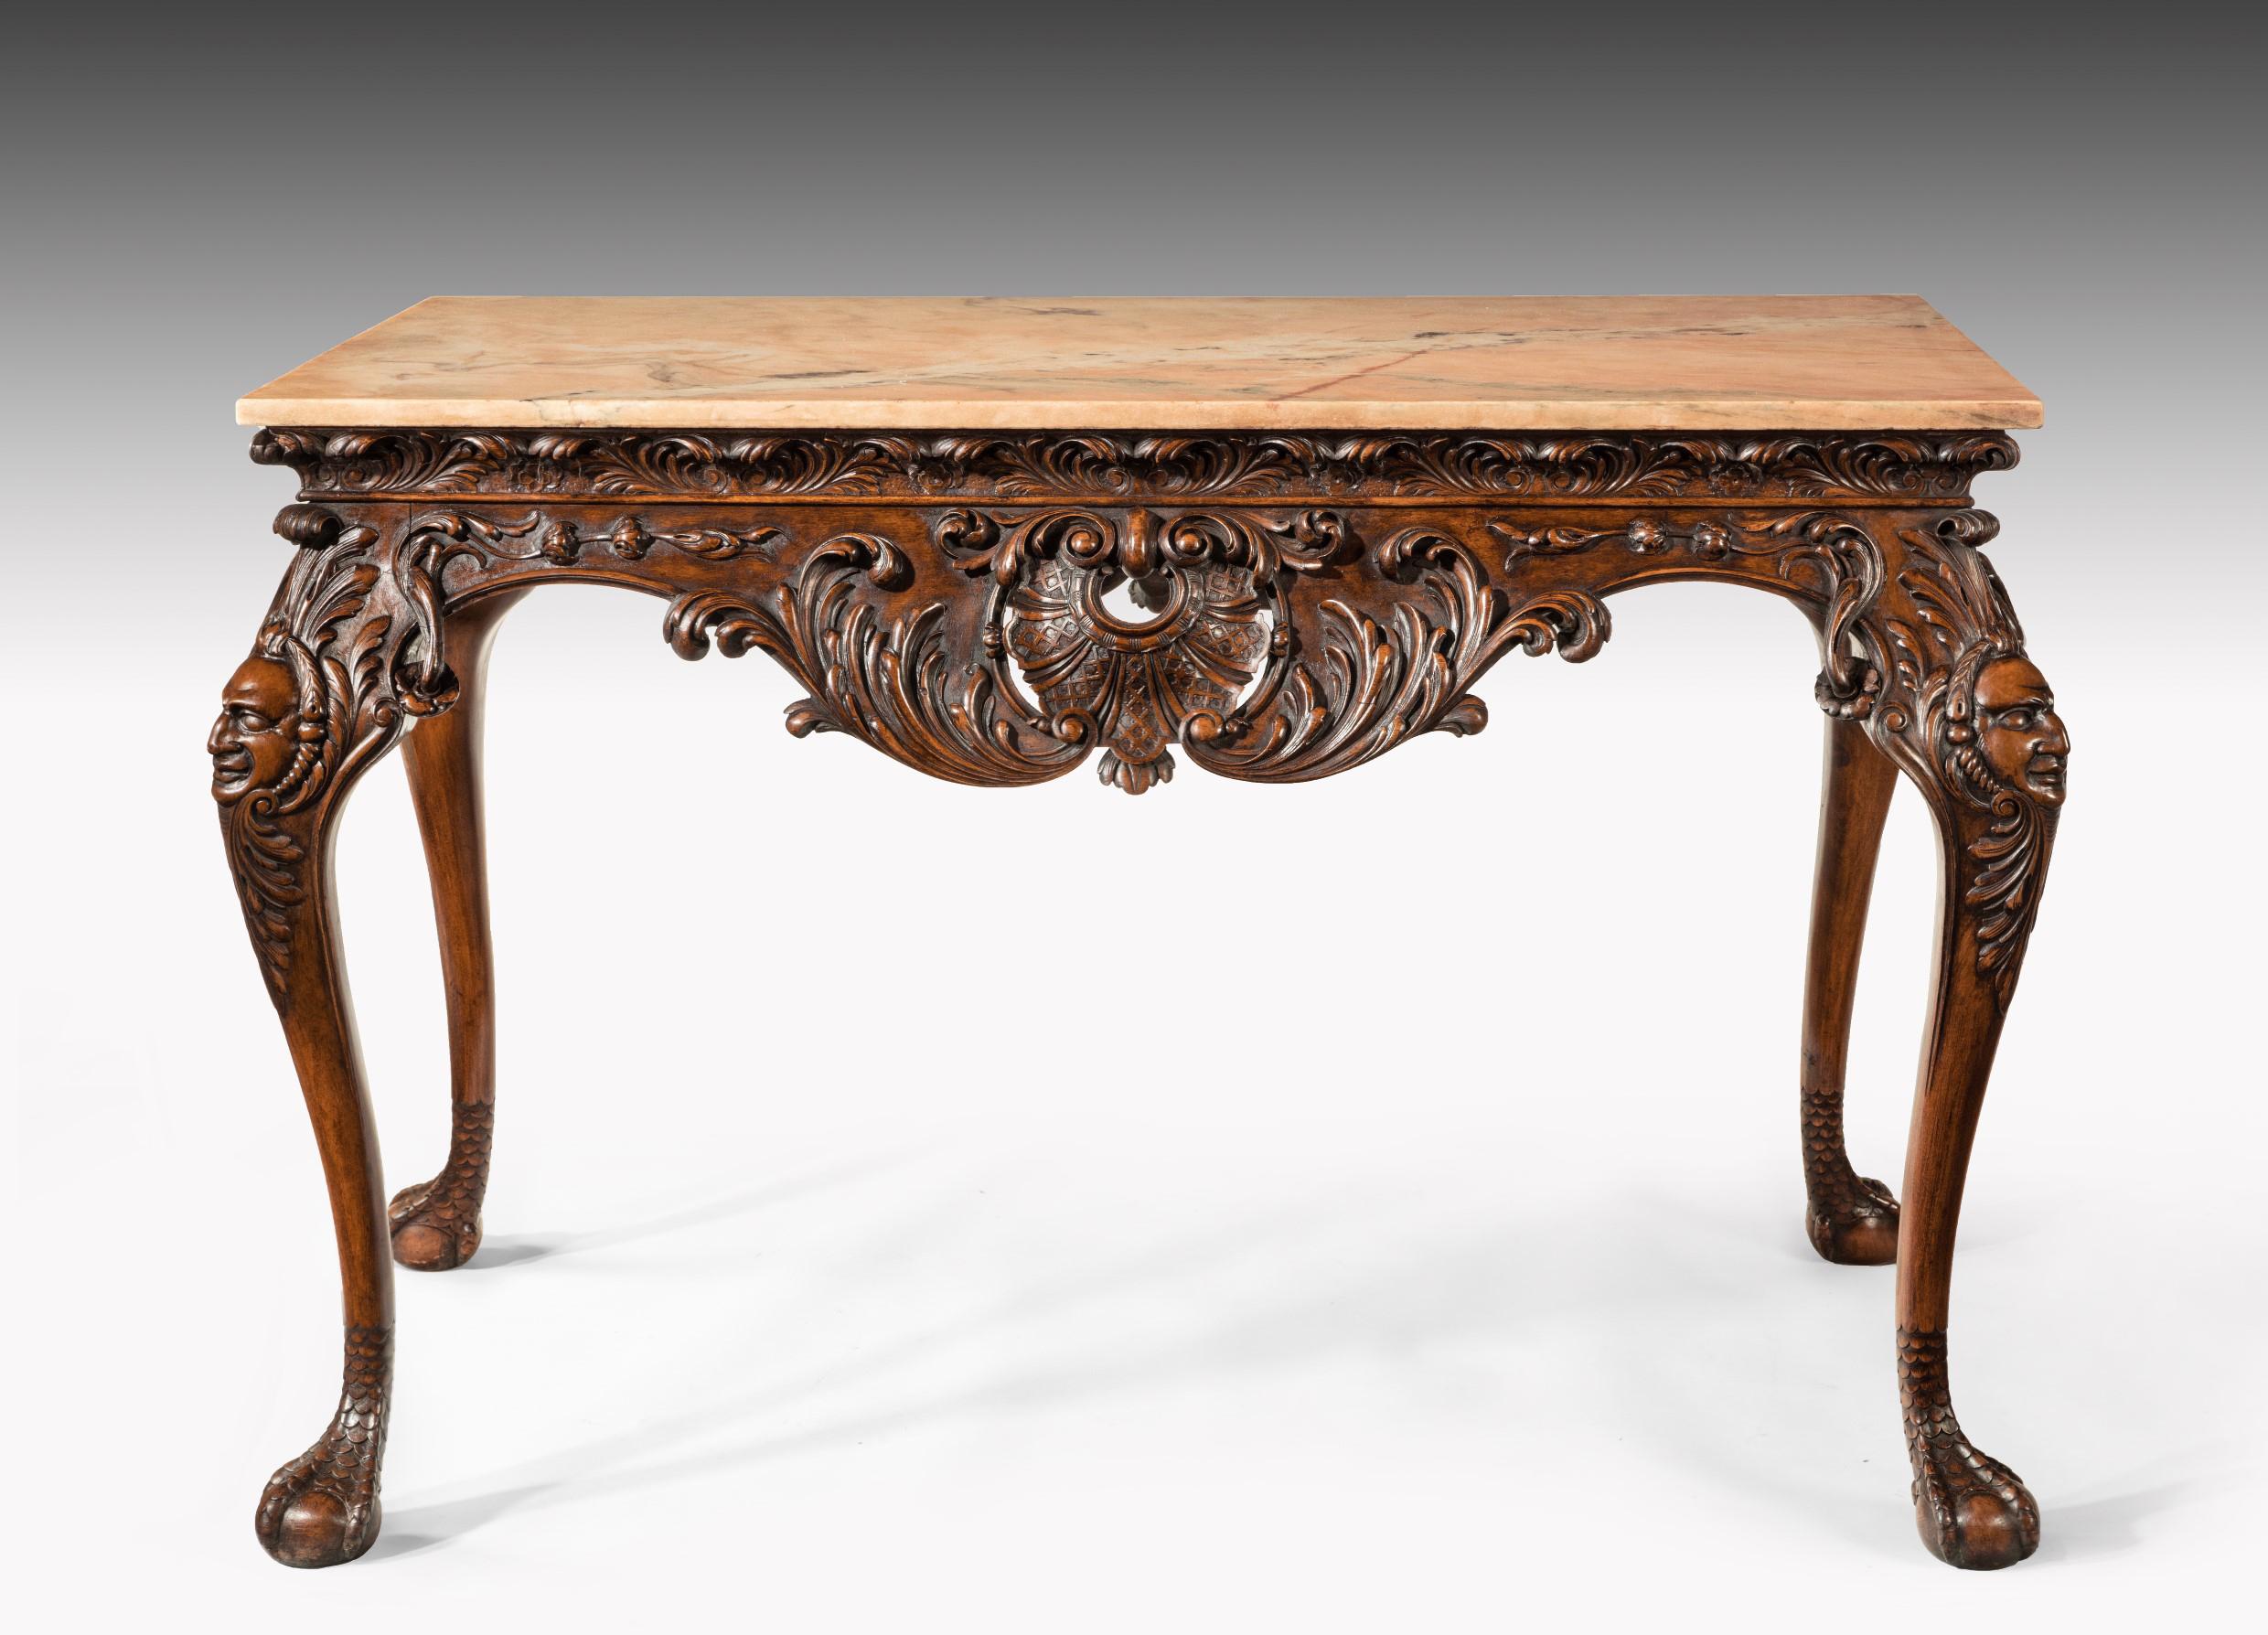 A finely carved 19th century marble topped walnut centre table stamped Gillows.

English, circa 1860.

The later rectangular Lamartine marble top sits above an acanthus carved frieze with central scrolling and shell-carved serpentine apron.